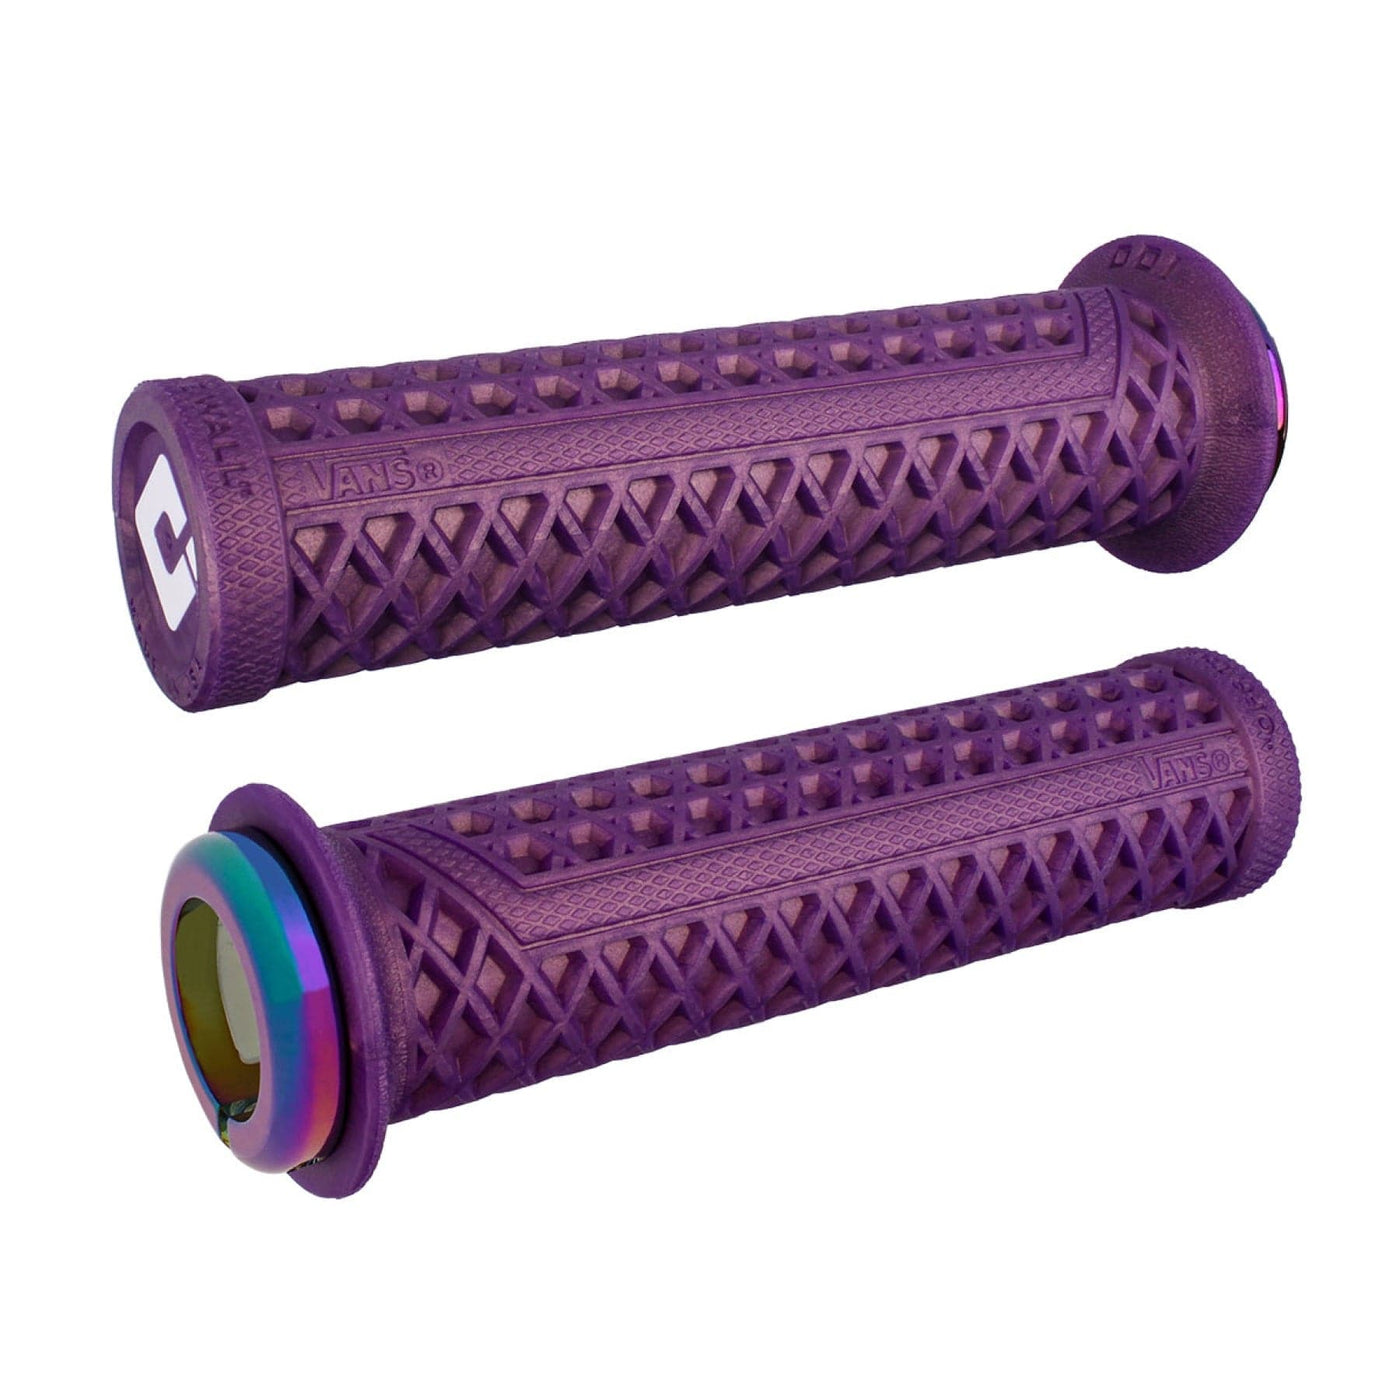 ODI VANS V2.1 Lock On Grips 135mm - Limited Edition Purple 8Lines Shop - Fast Shipping